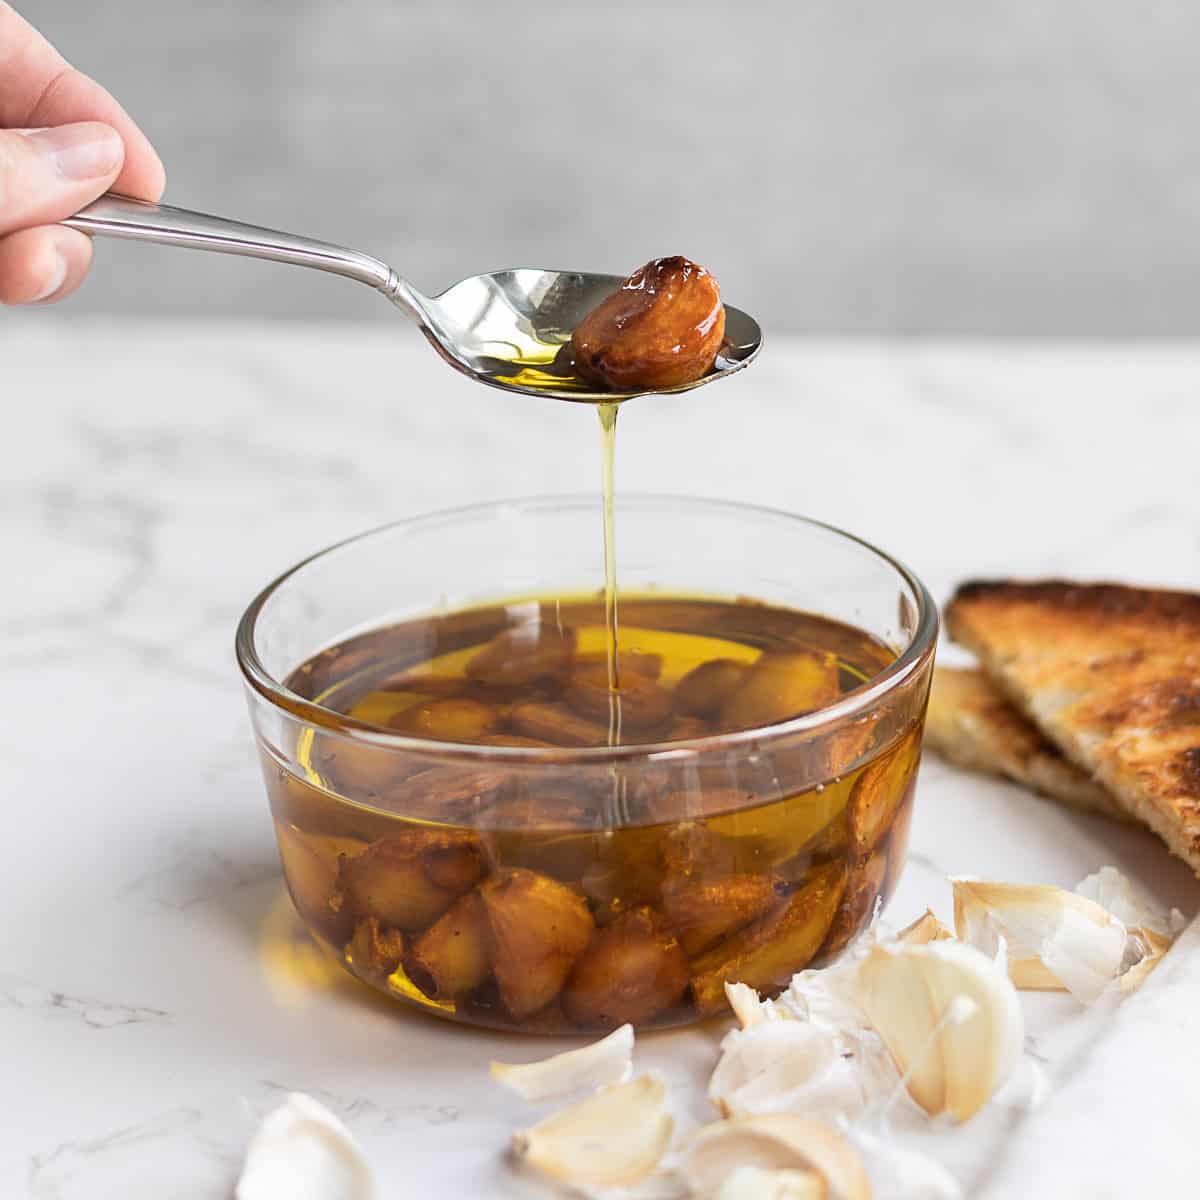 spoon holding a piece of garlic confit